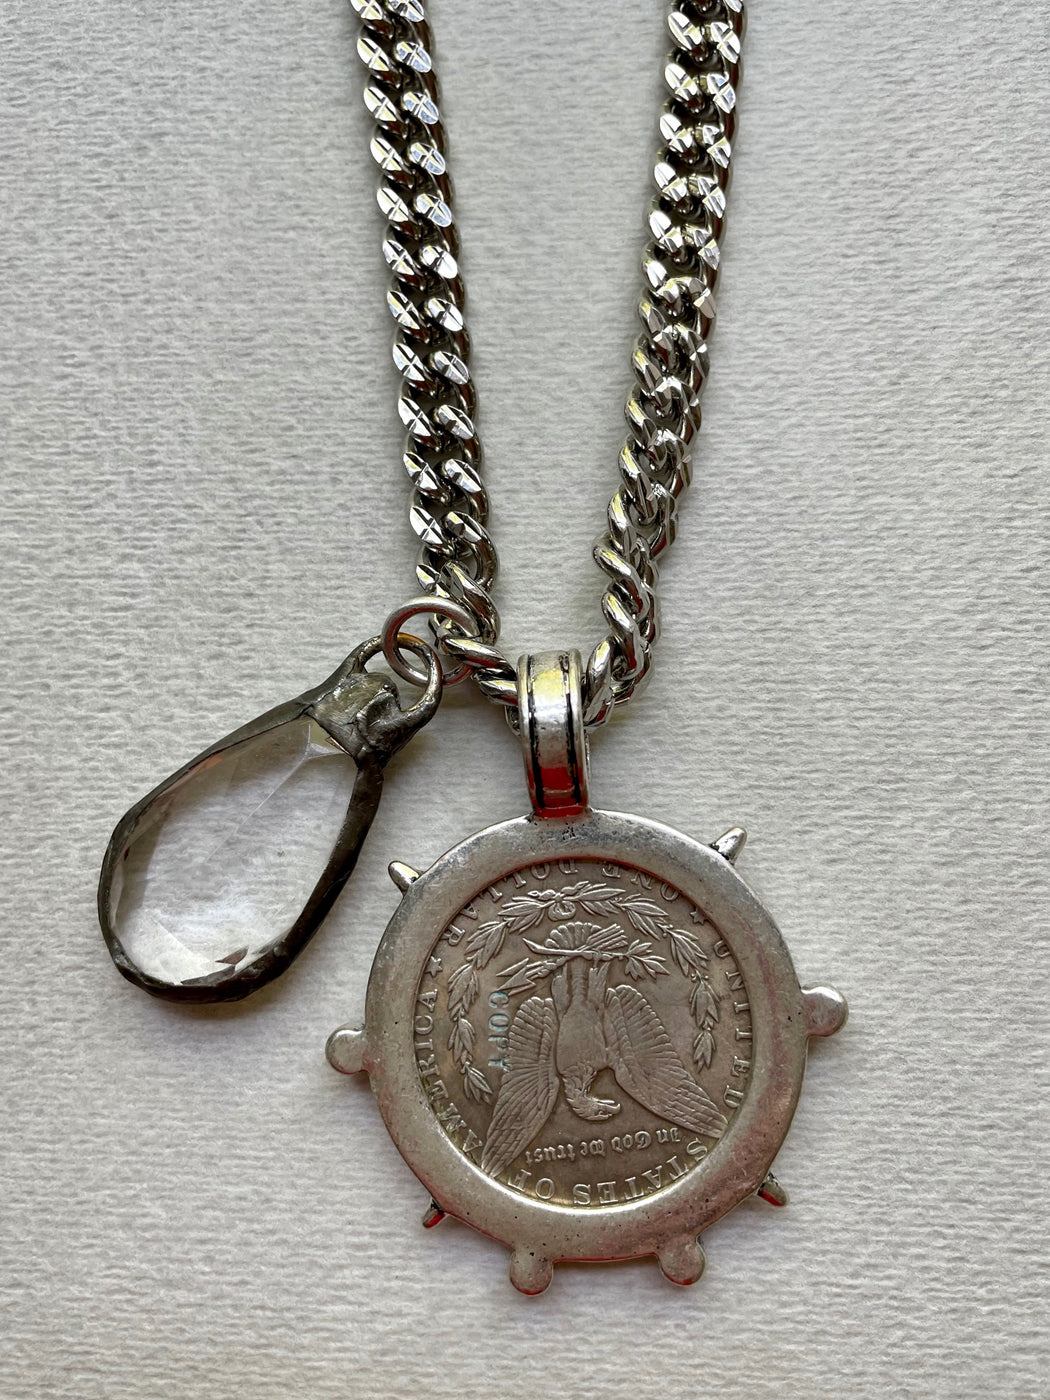 Vintage "Silver Dollar" Necklace by Meredith Waterstraat